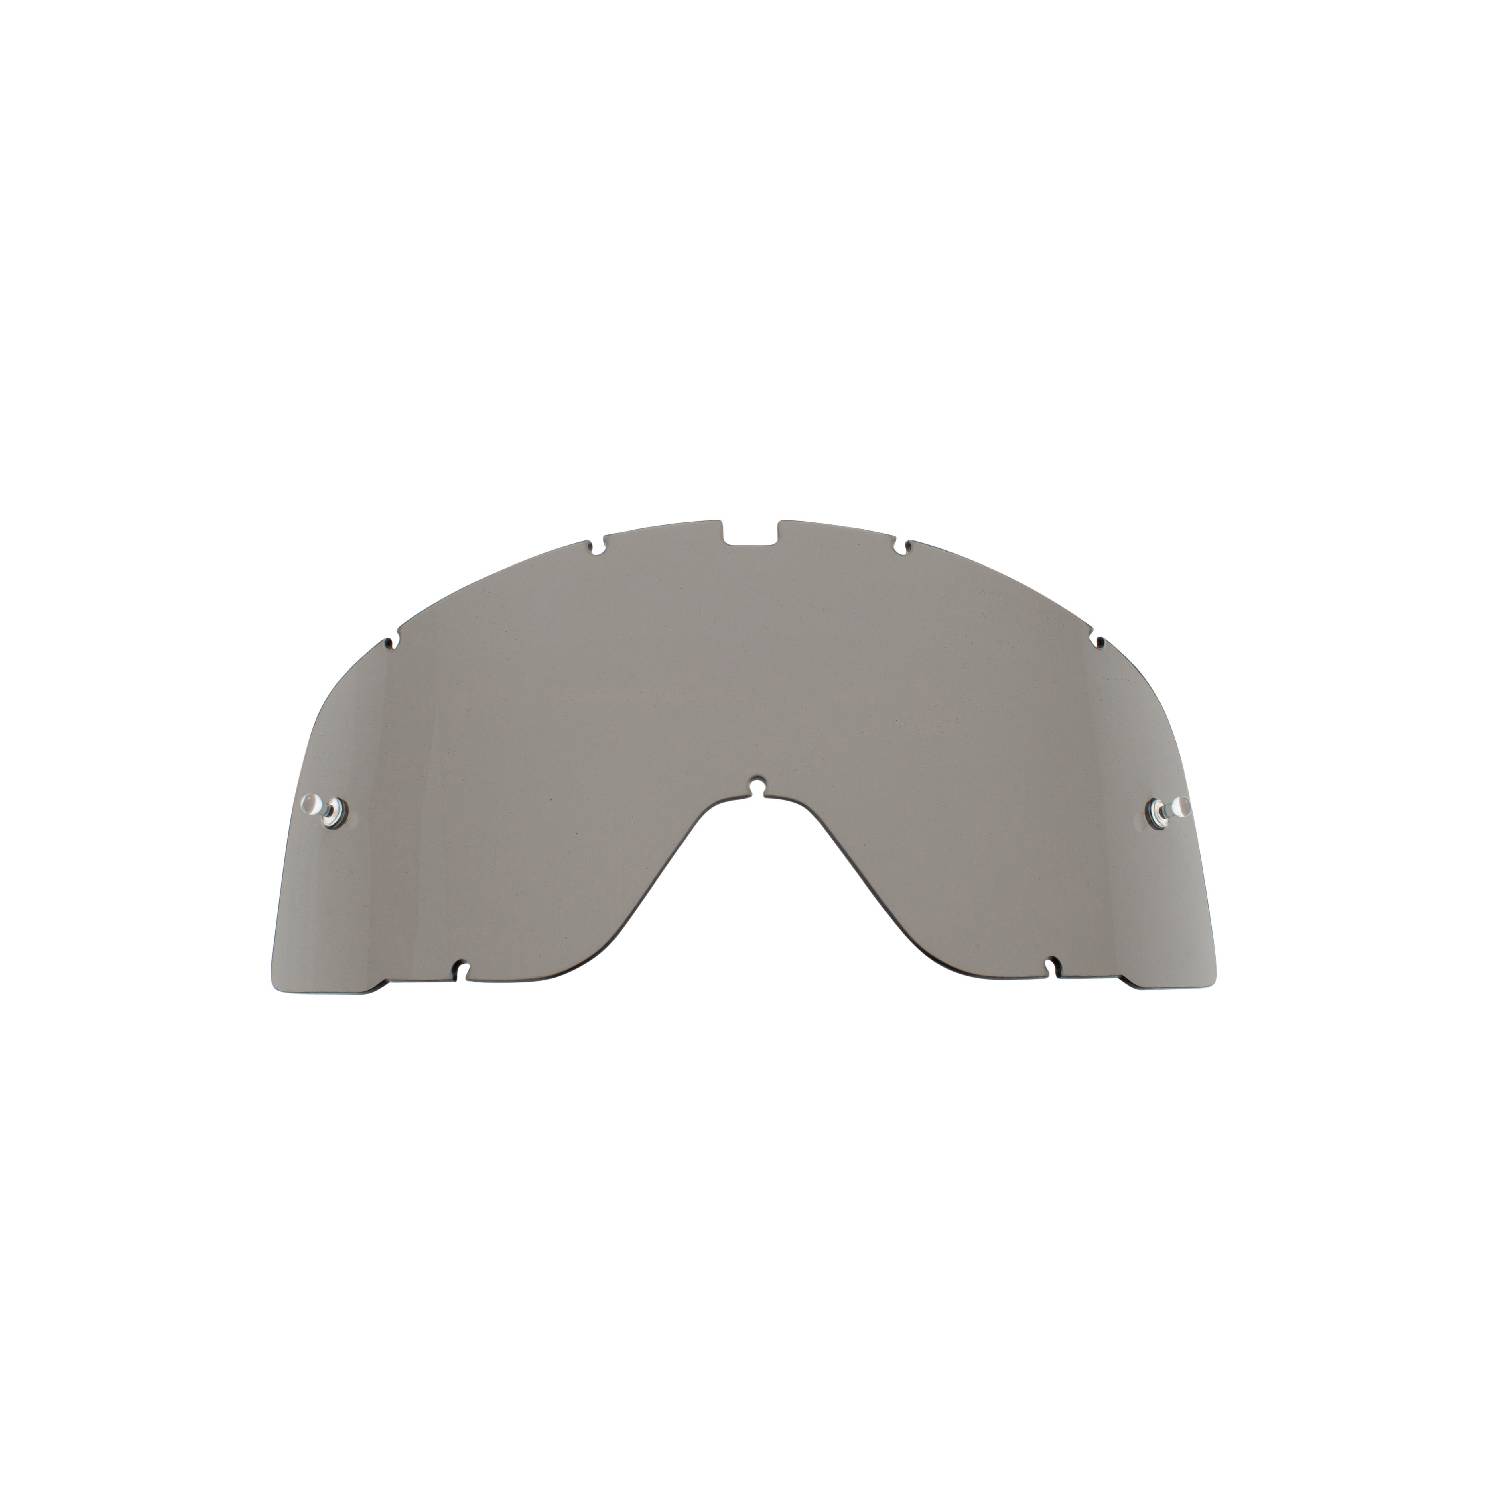 smokey replacement lenses for goggles compatible for 100% Barstow / Barstow Curved goggle